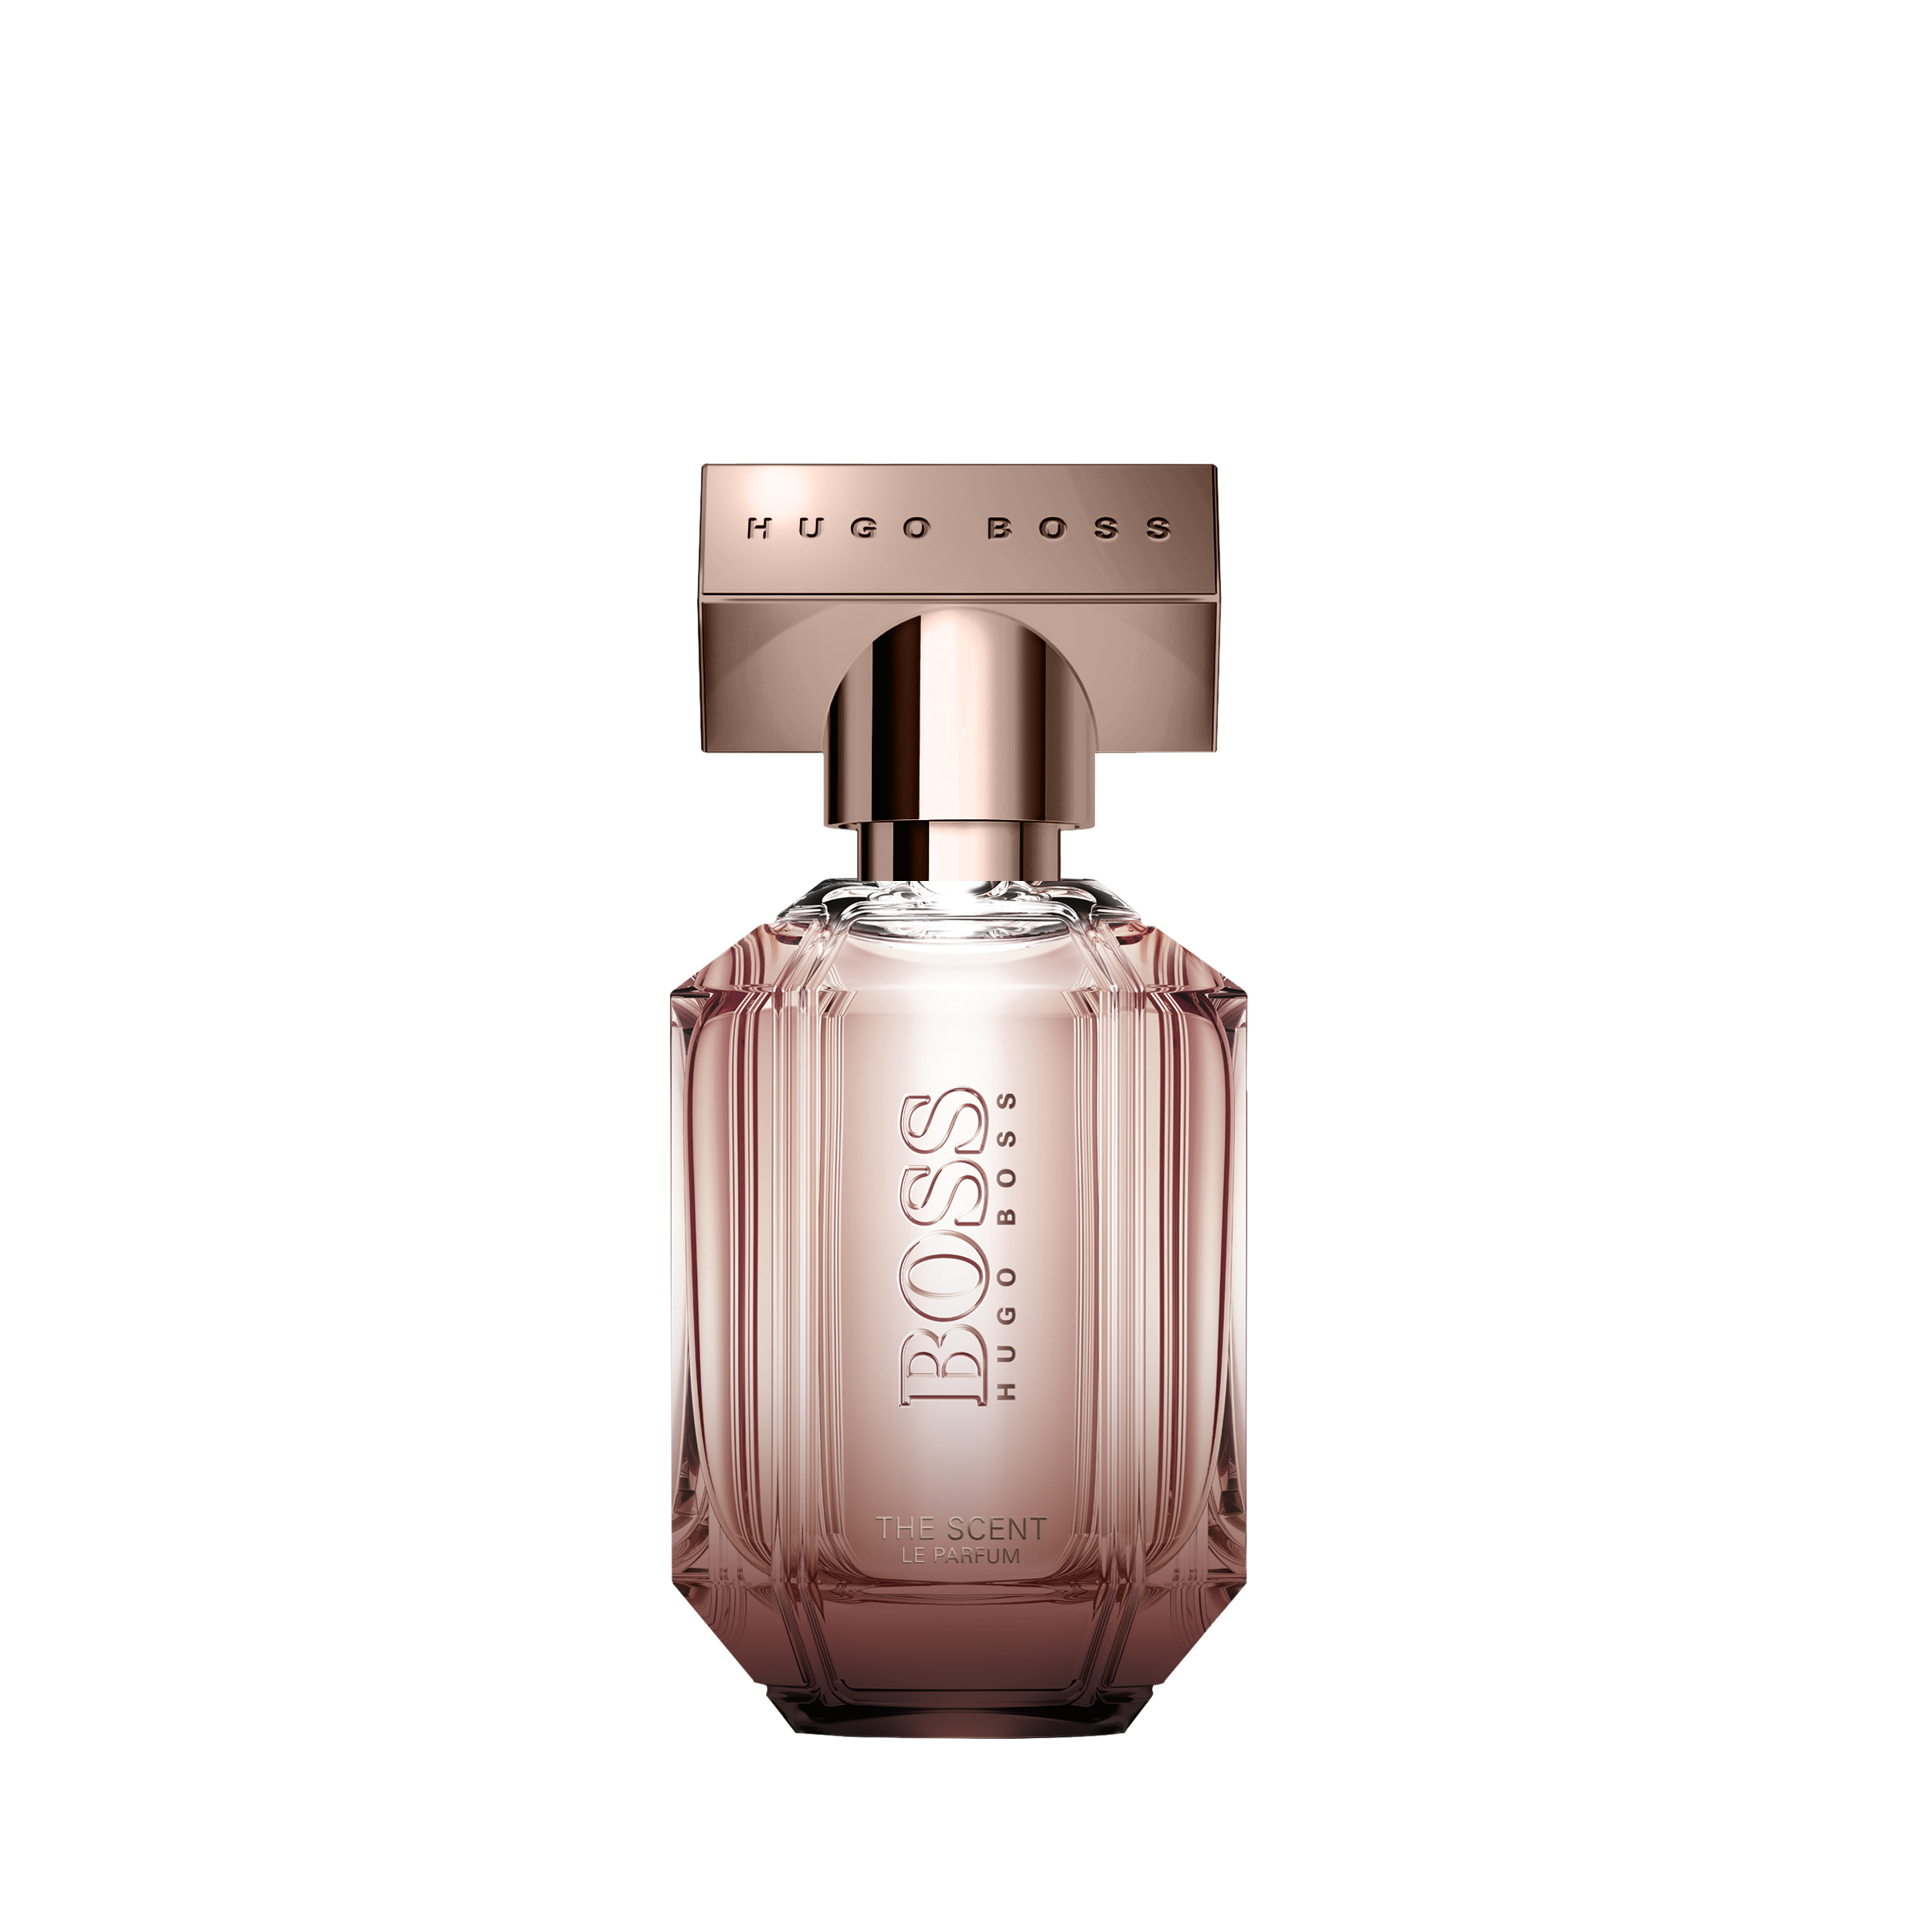 Le scent hugo boss. Hugo Boss the Scent le Parfum. Hugo Boss the Scent for her 100 ml. Hugo Boss the Scent le Parfum for her. Hugo Boss Boss the Scent le Parfum for her.